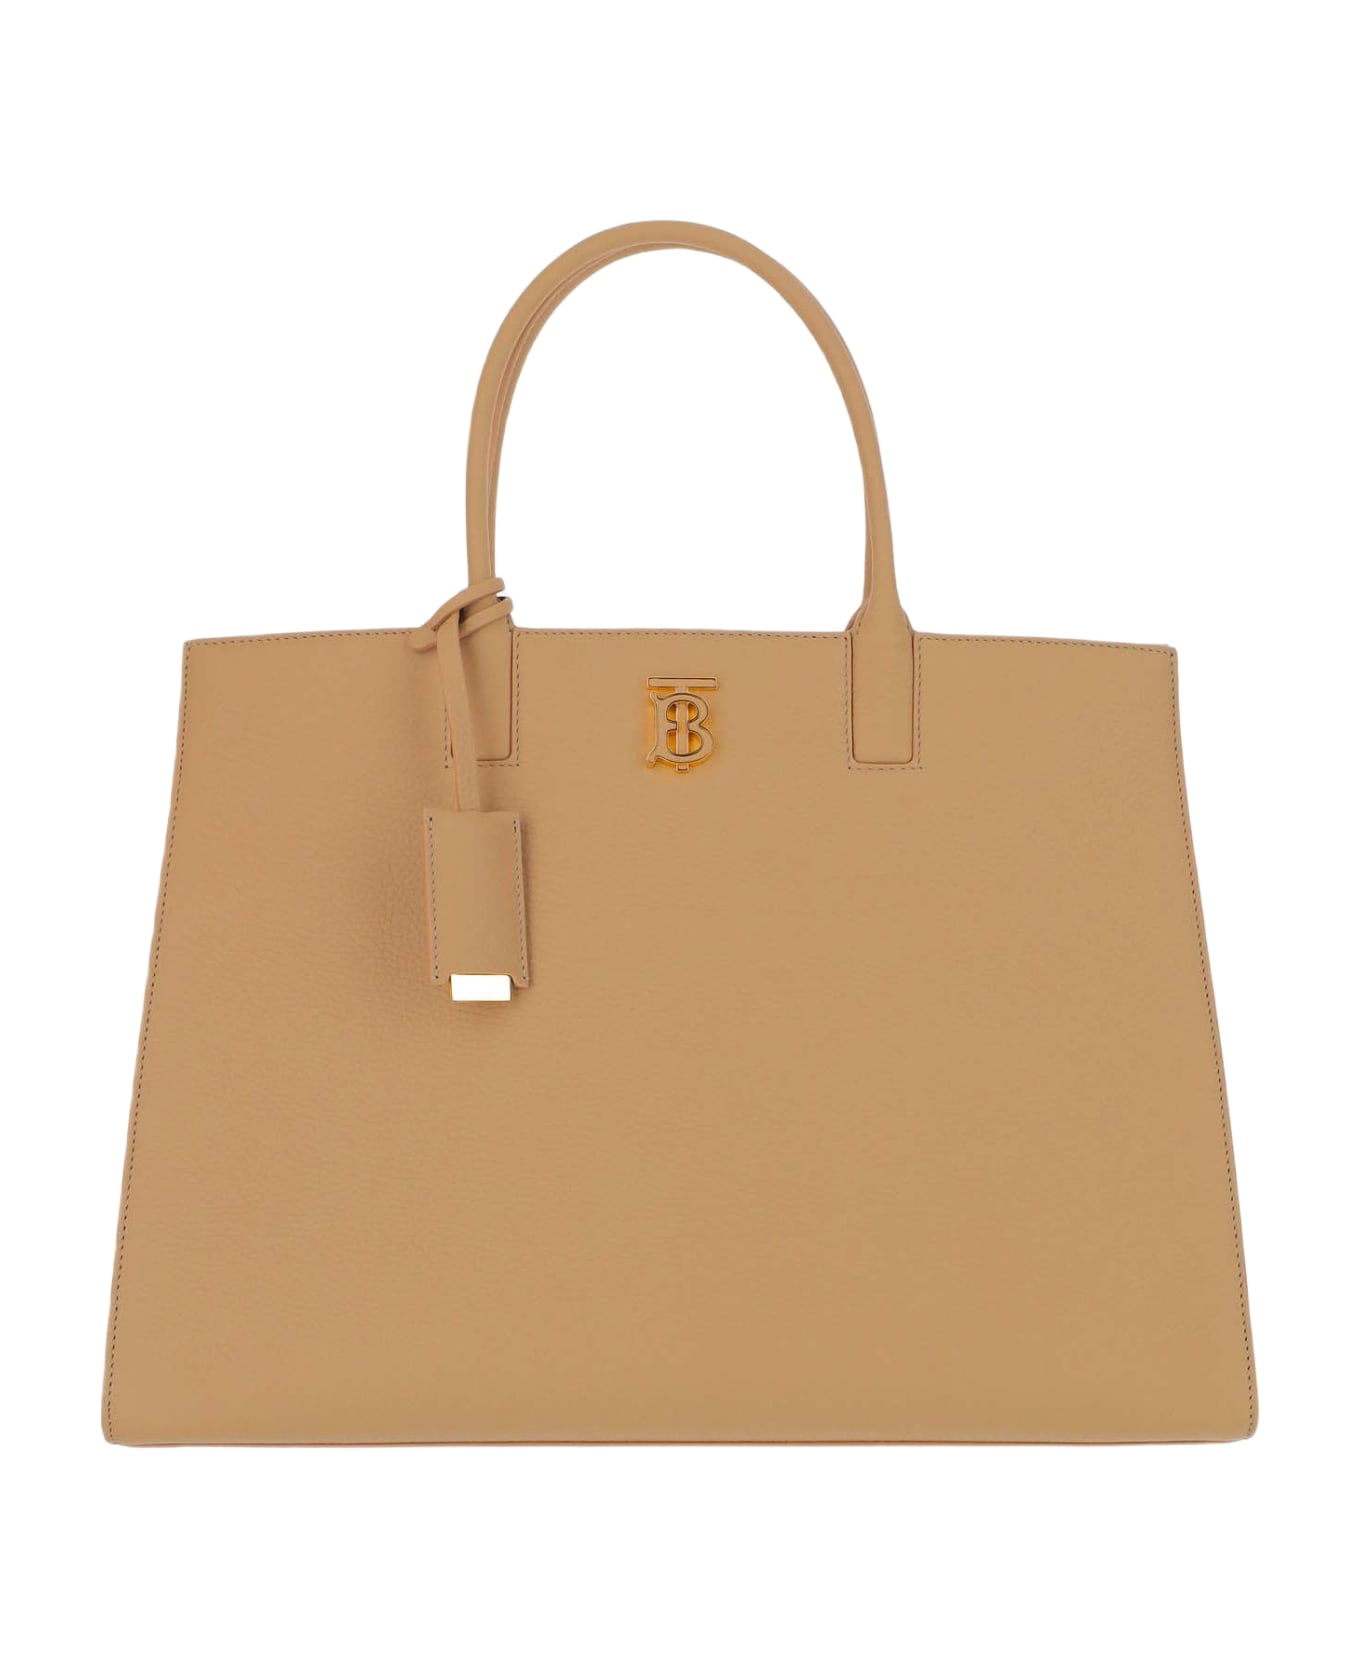 Burberry Frances Small Tote Bag - Beige トートバッグ